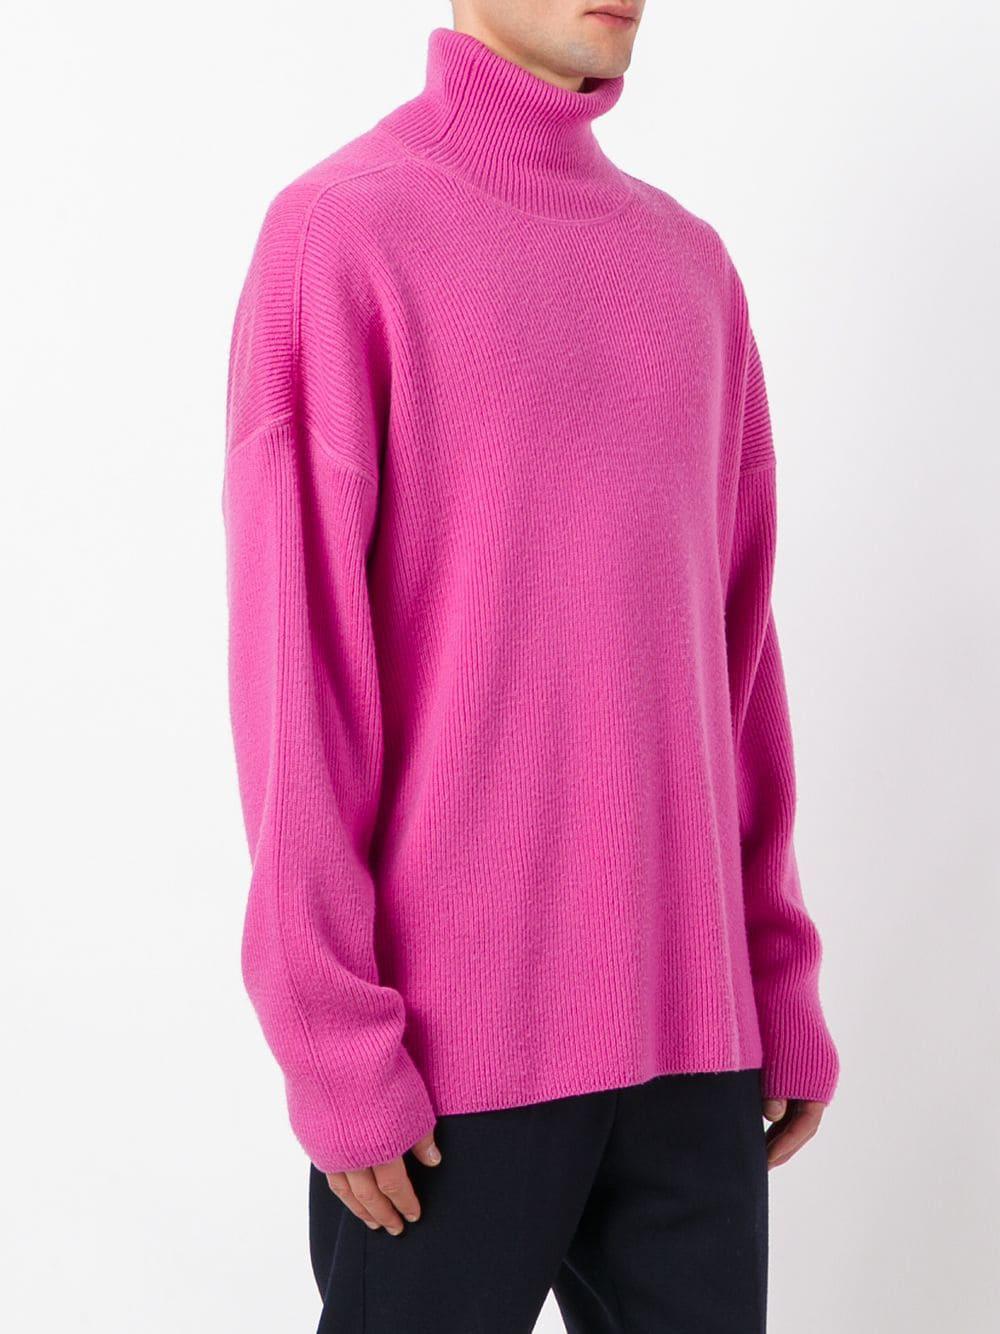 AMI Wool Oversized Turtleneck Sweater in Pink for Men - Lyst